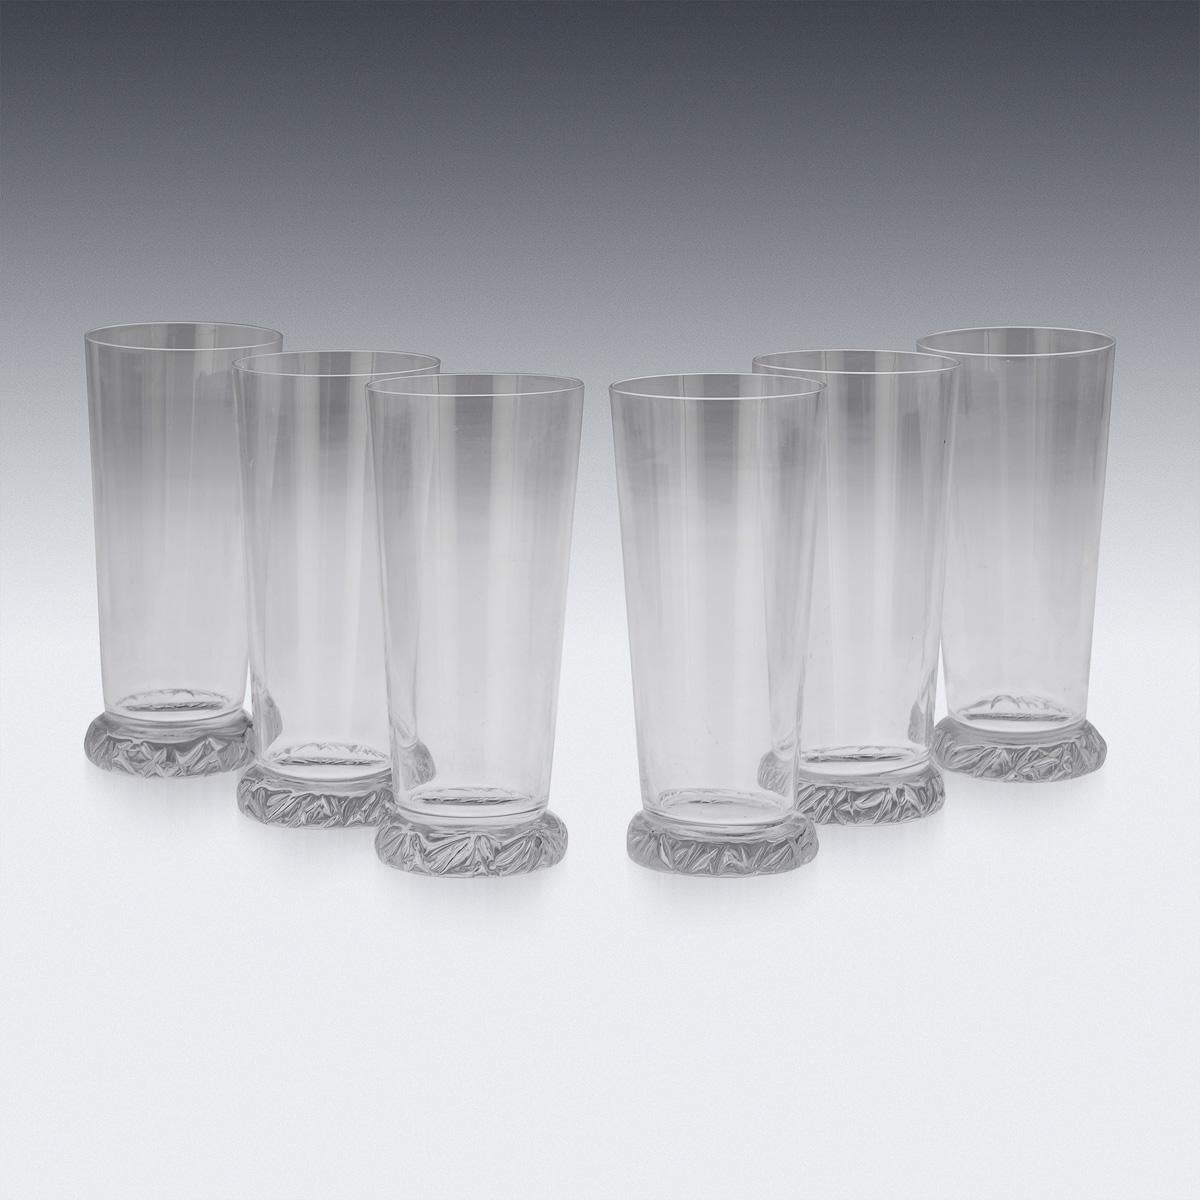 A set of six sculptural crystal lemonade or cocktail tumblers. Made around the middle of the 20th century, this refined translucent glass pattern was realised by the fabled French design house Daum. With its timeless form and clean modernist lines,